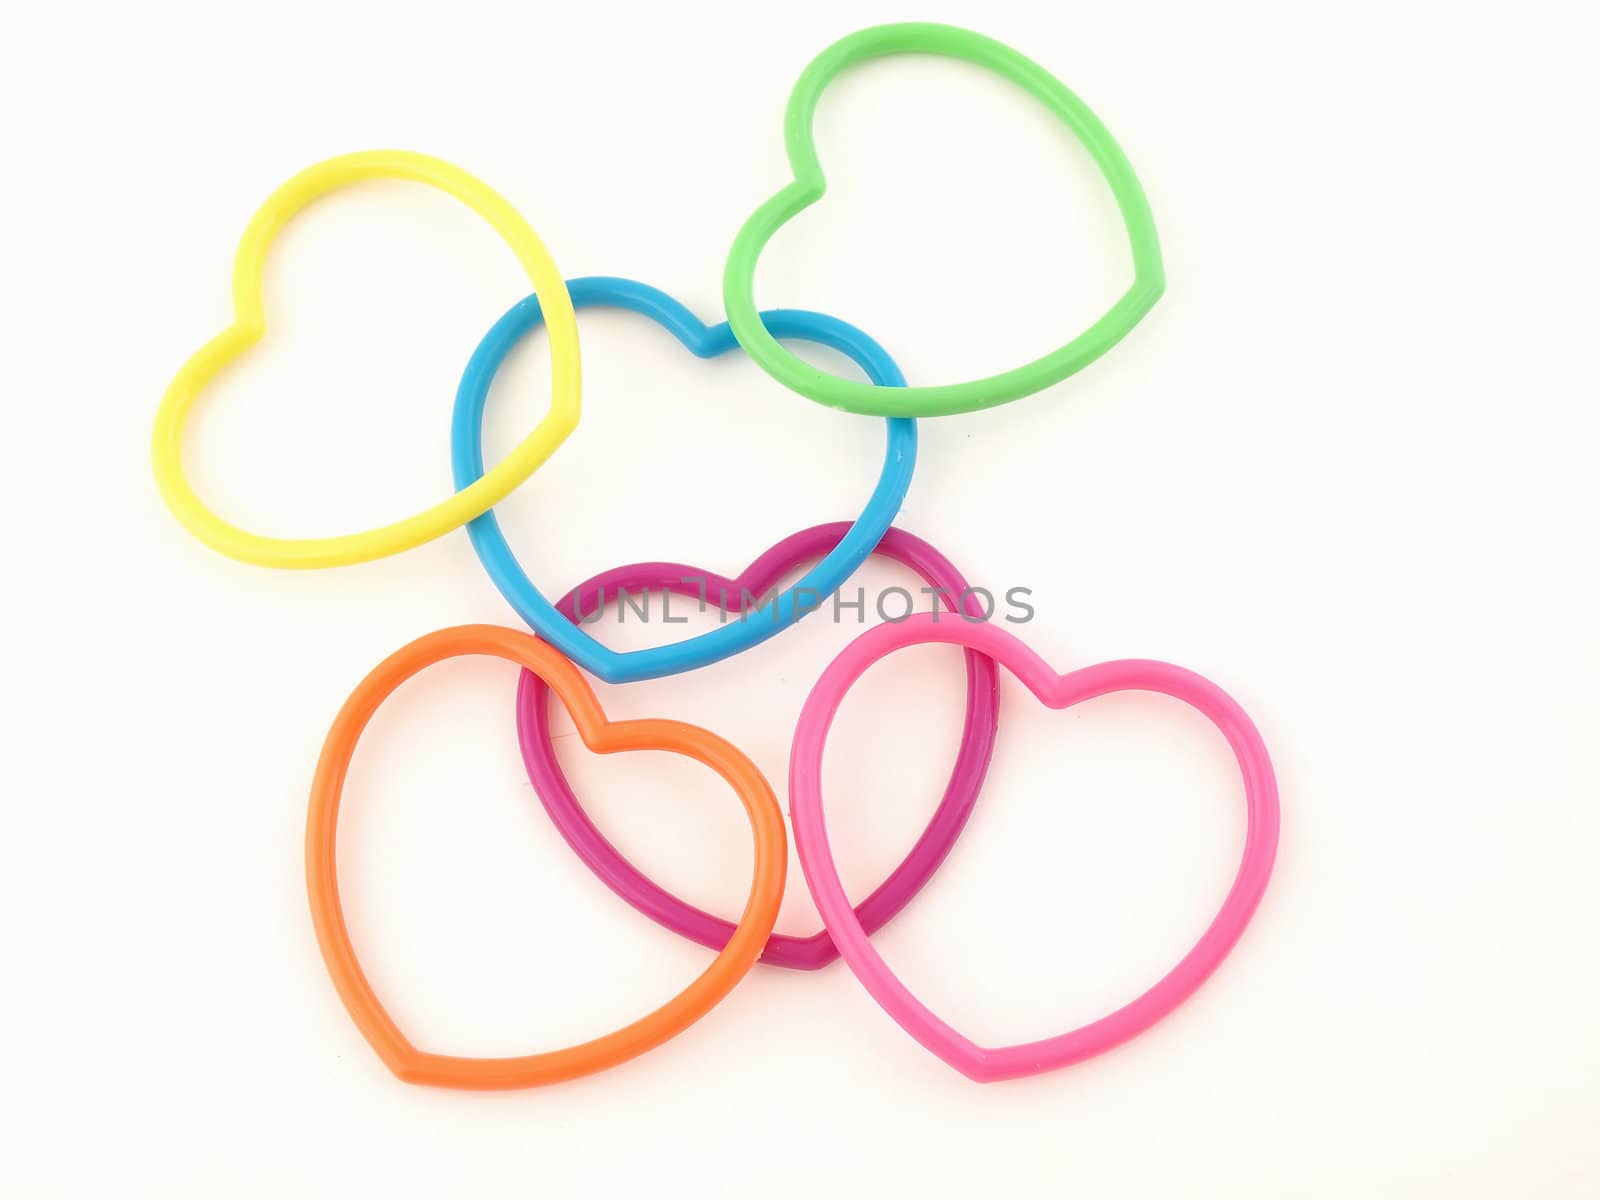 Six very colorful plastic hearts isolated on a white background